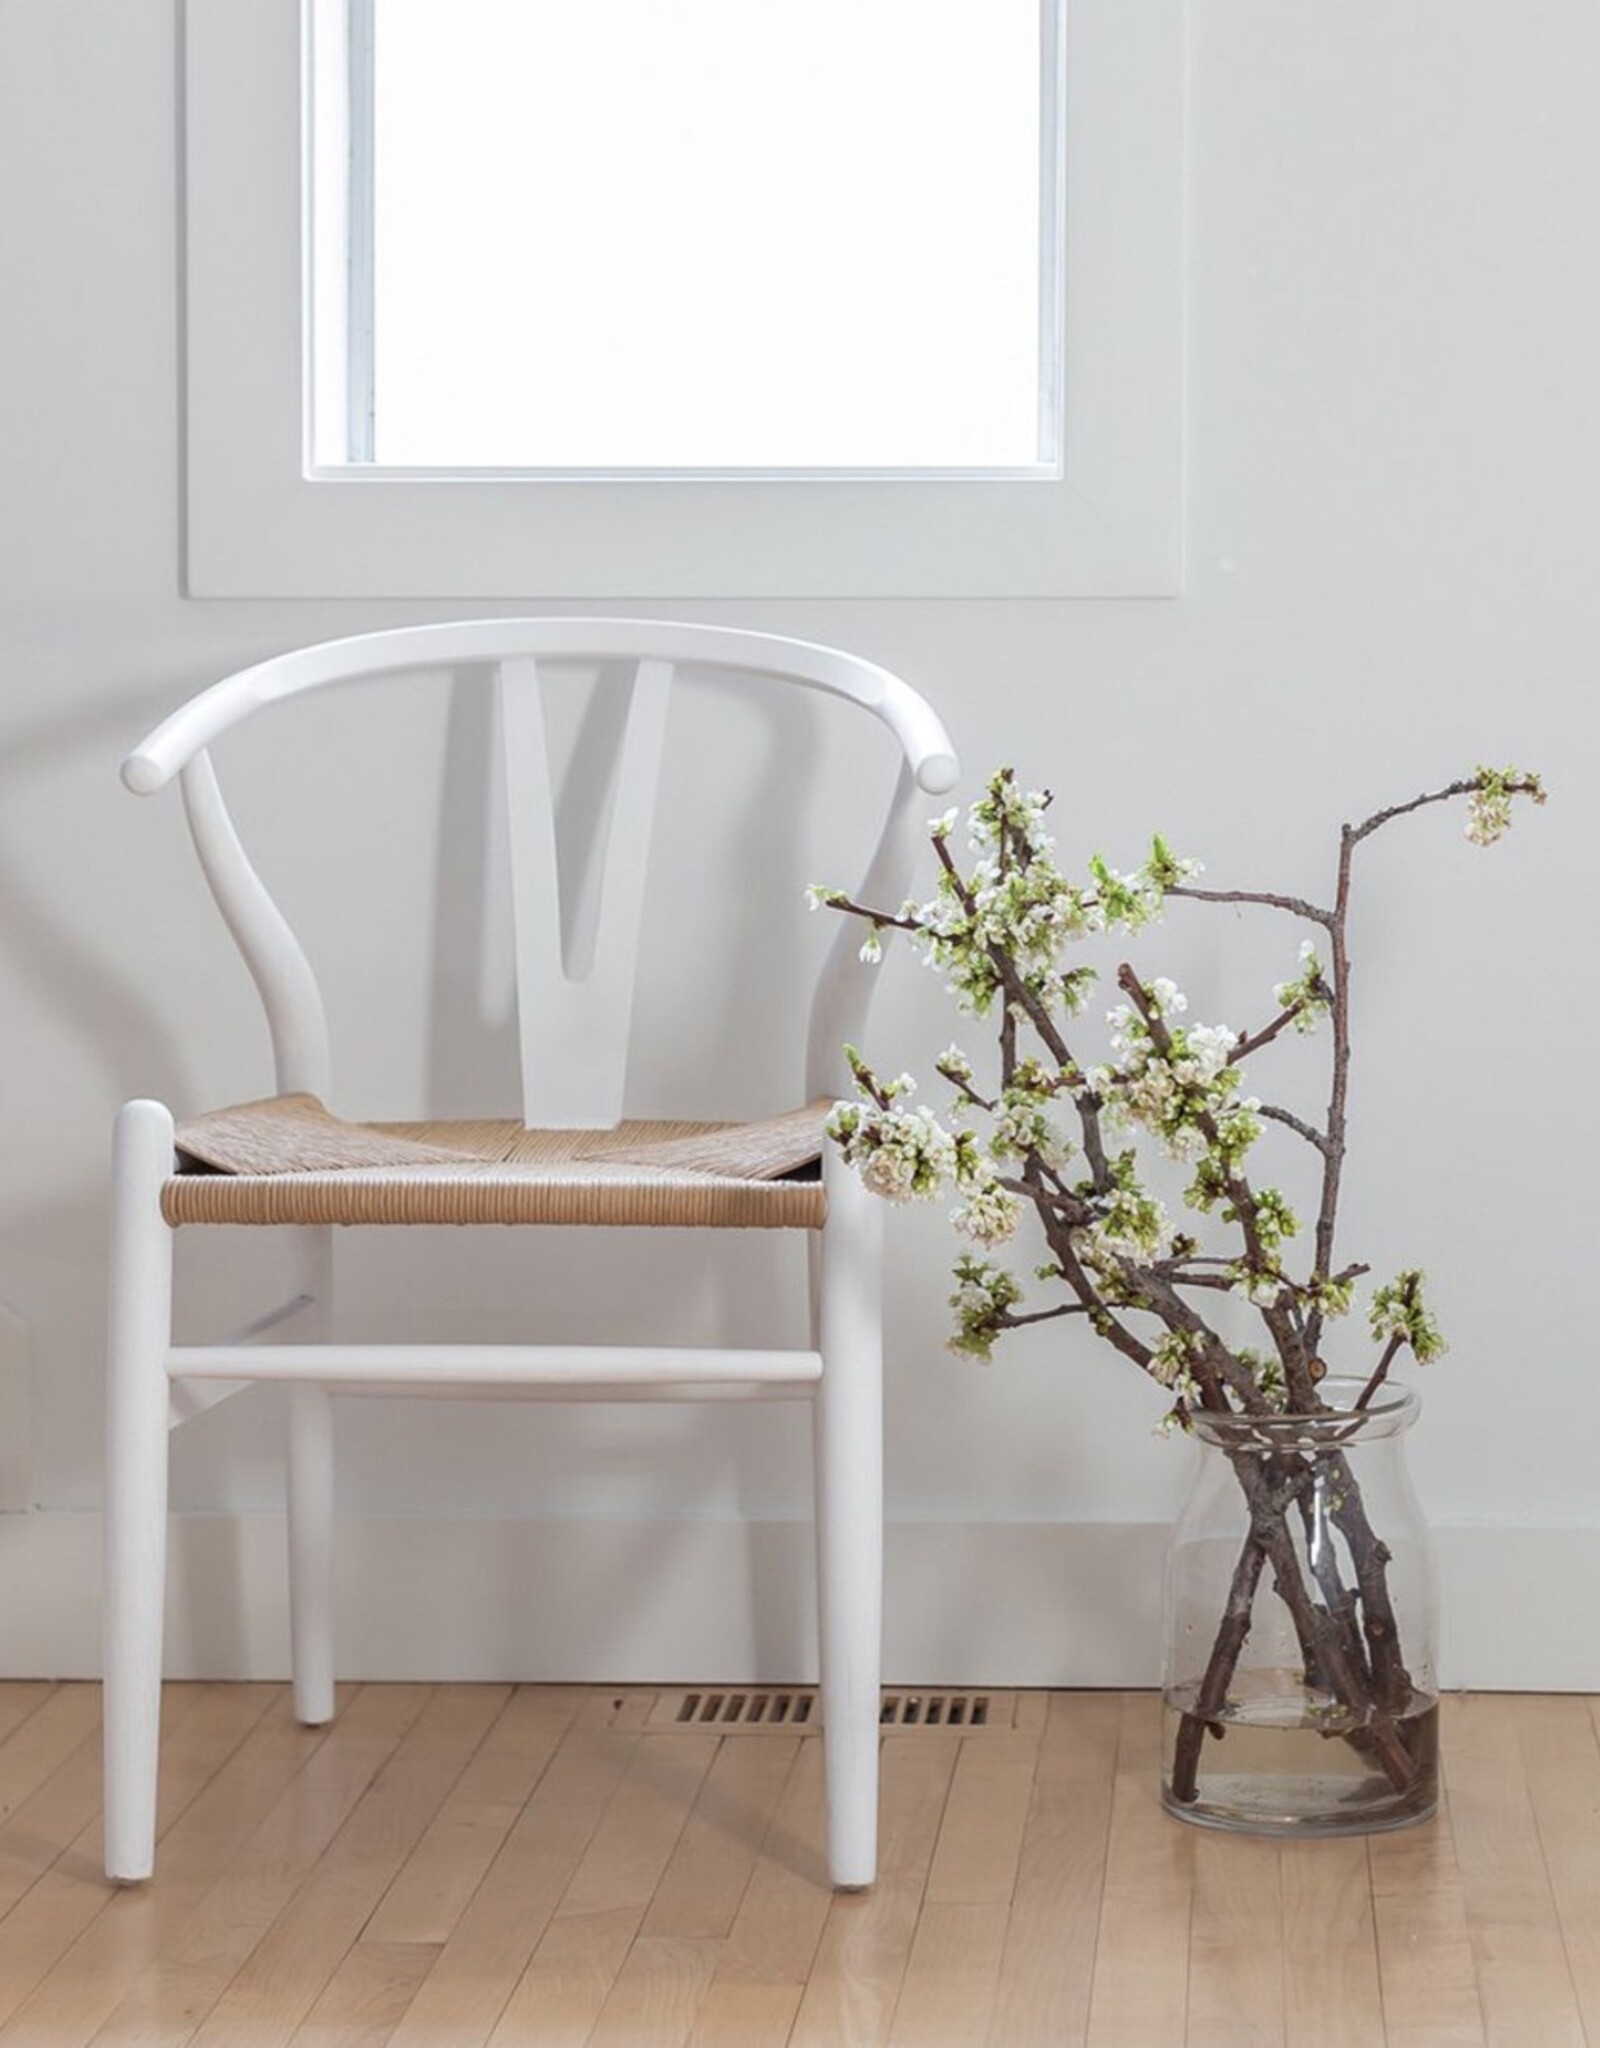 Frida Dining Chair in White and Natural